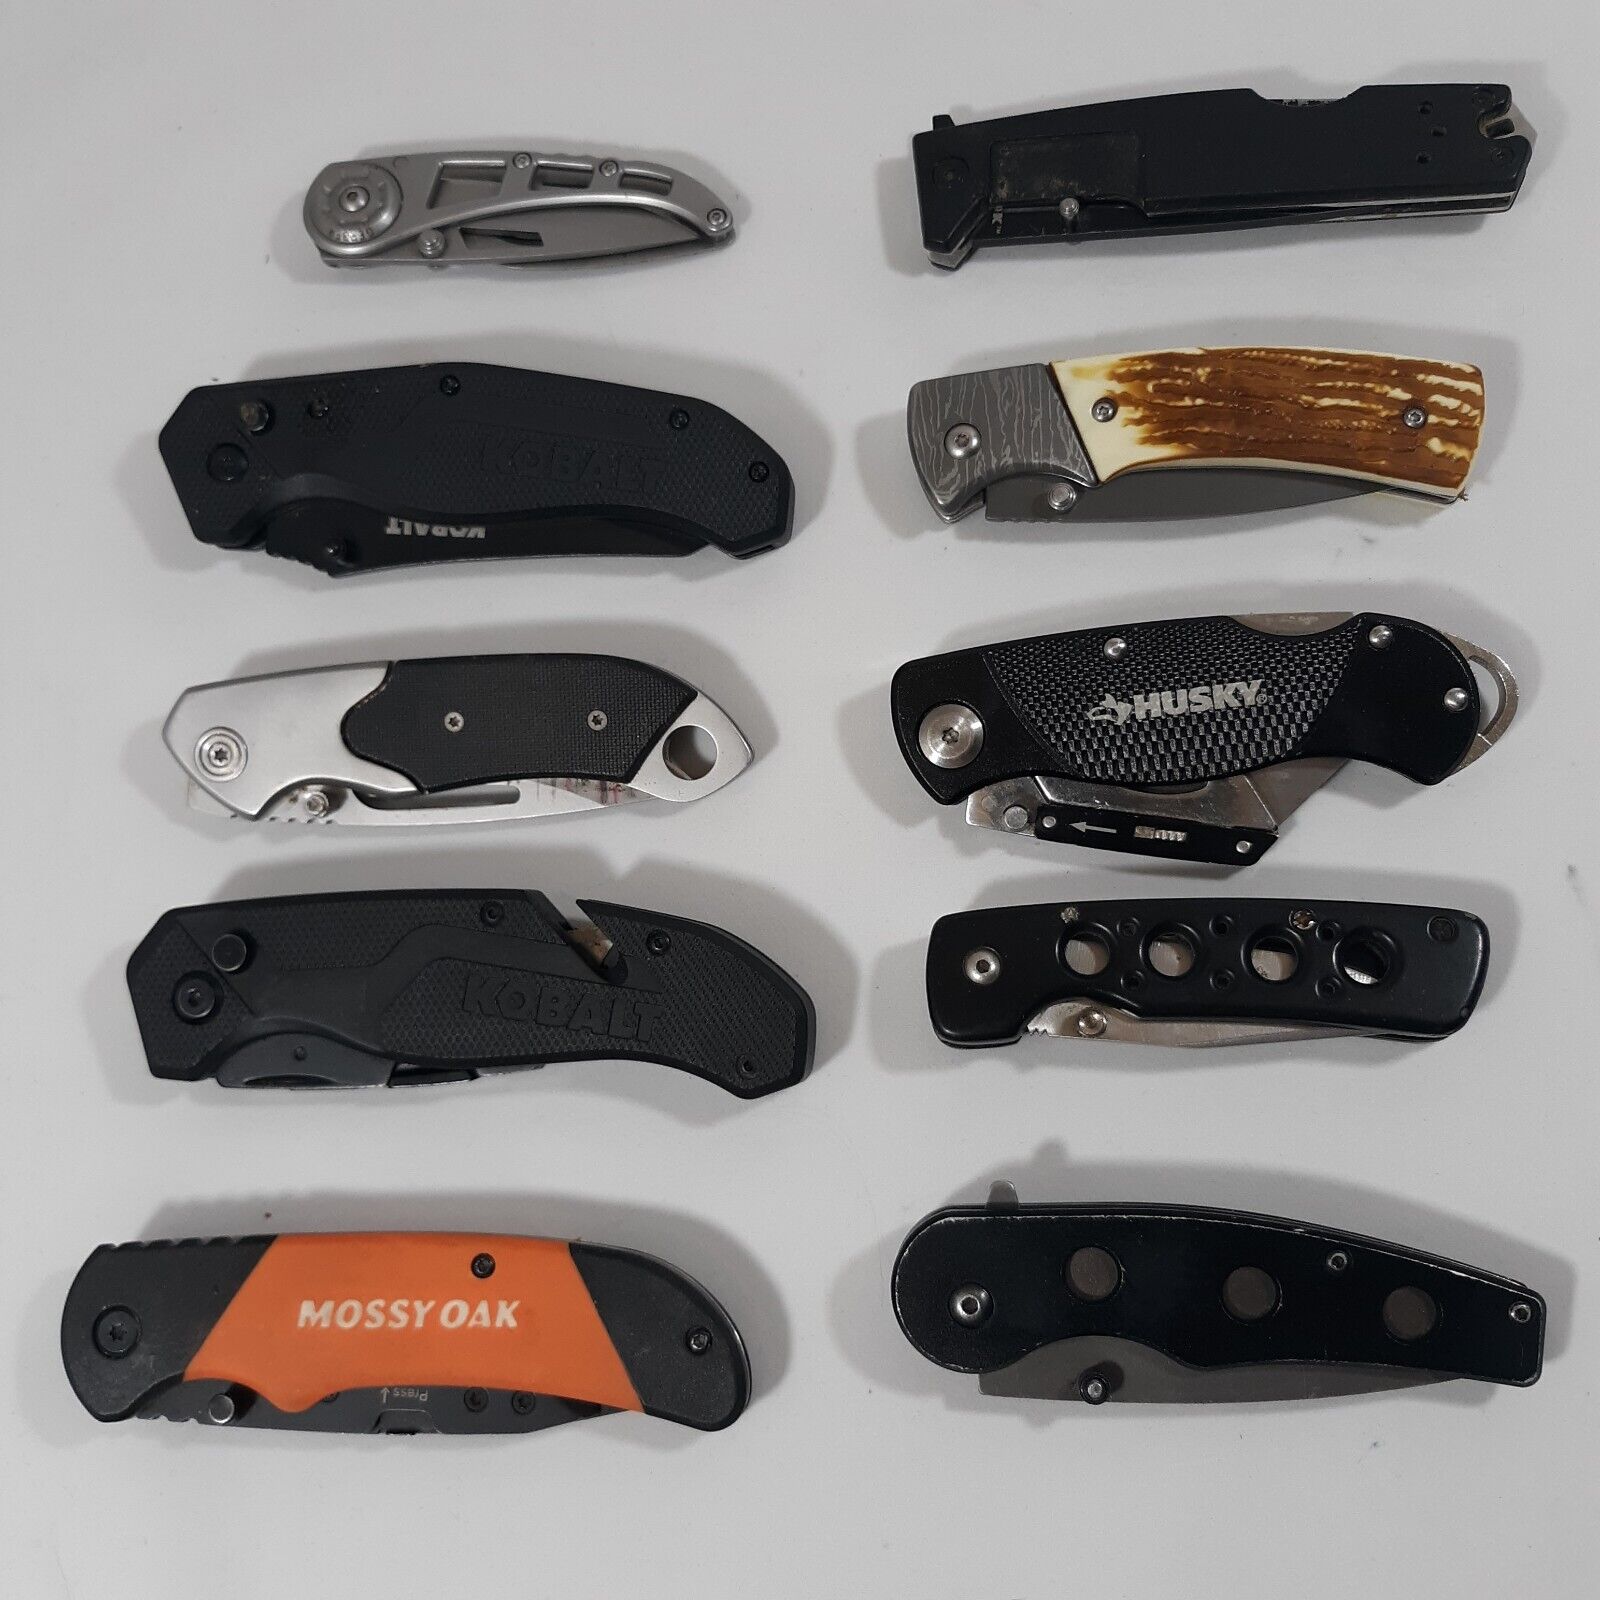 Lot of 10 Miscellaneous Pocket Knives